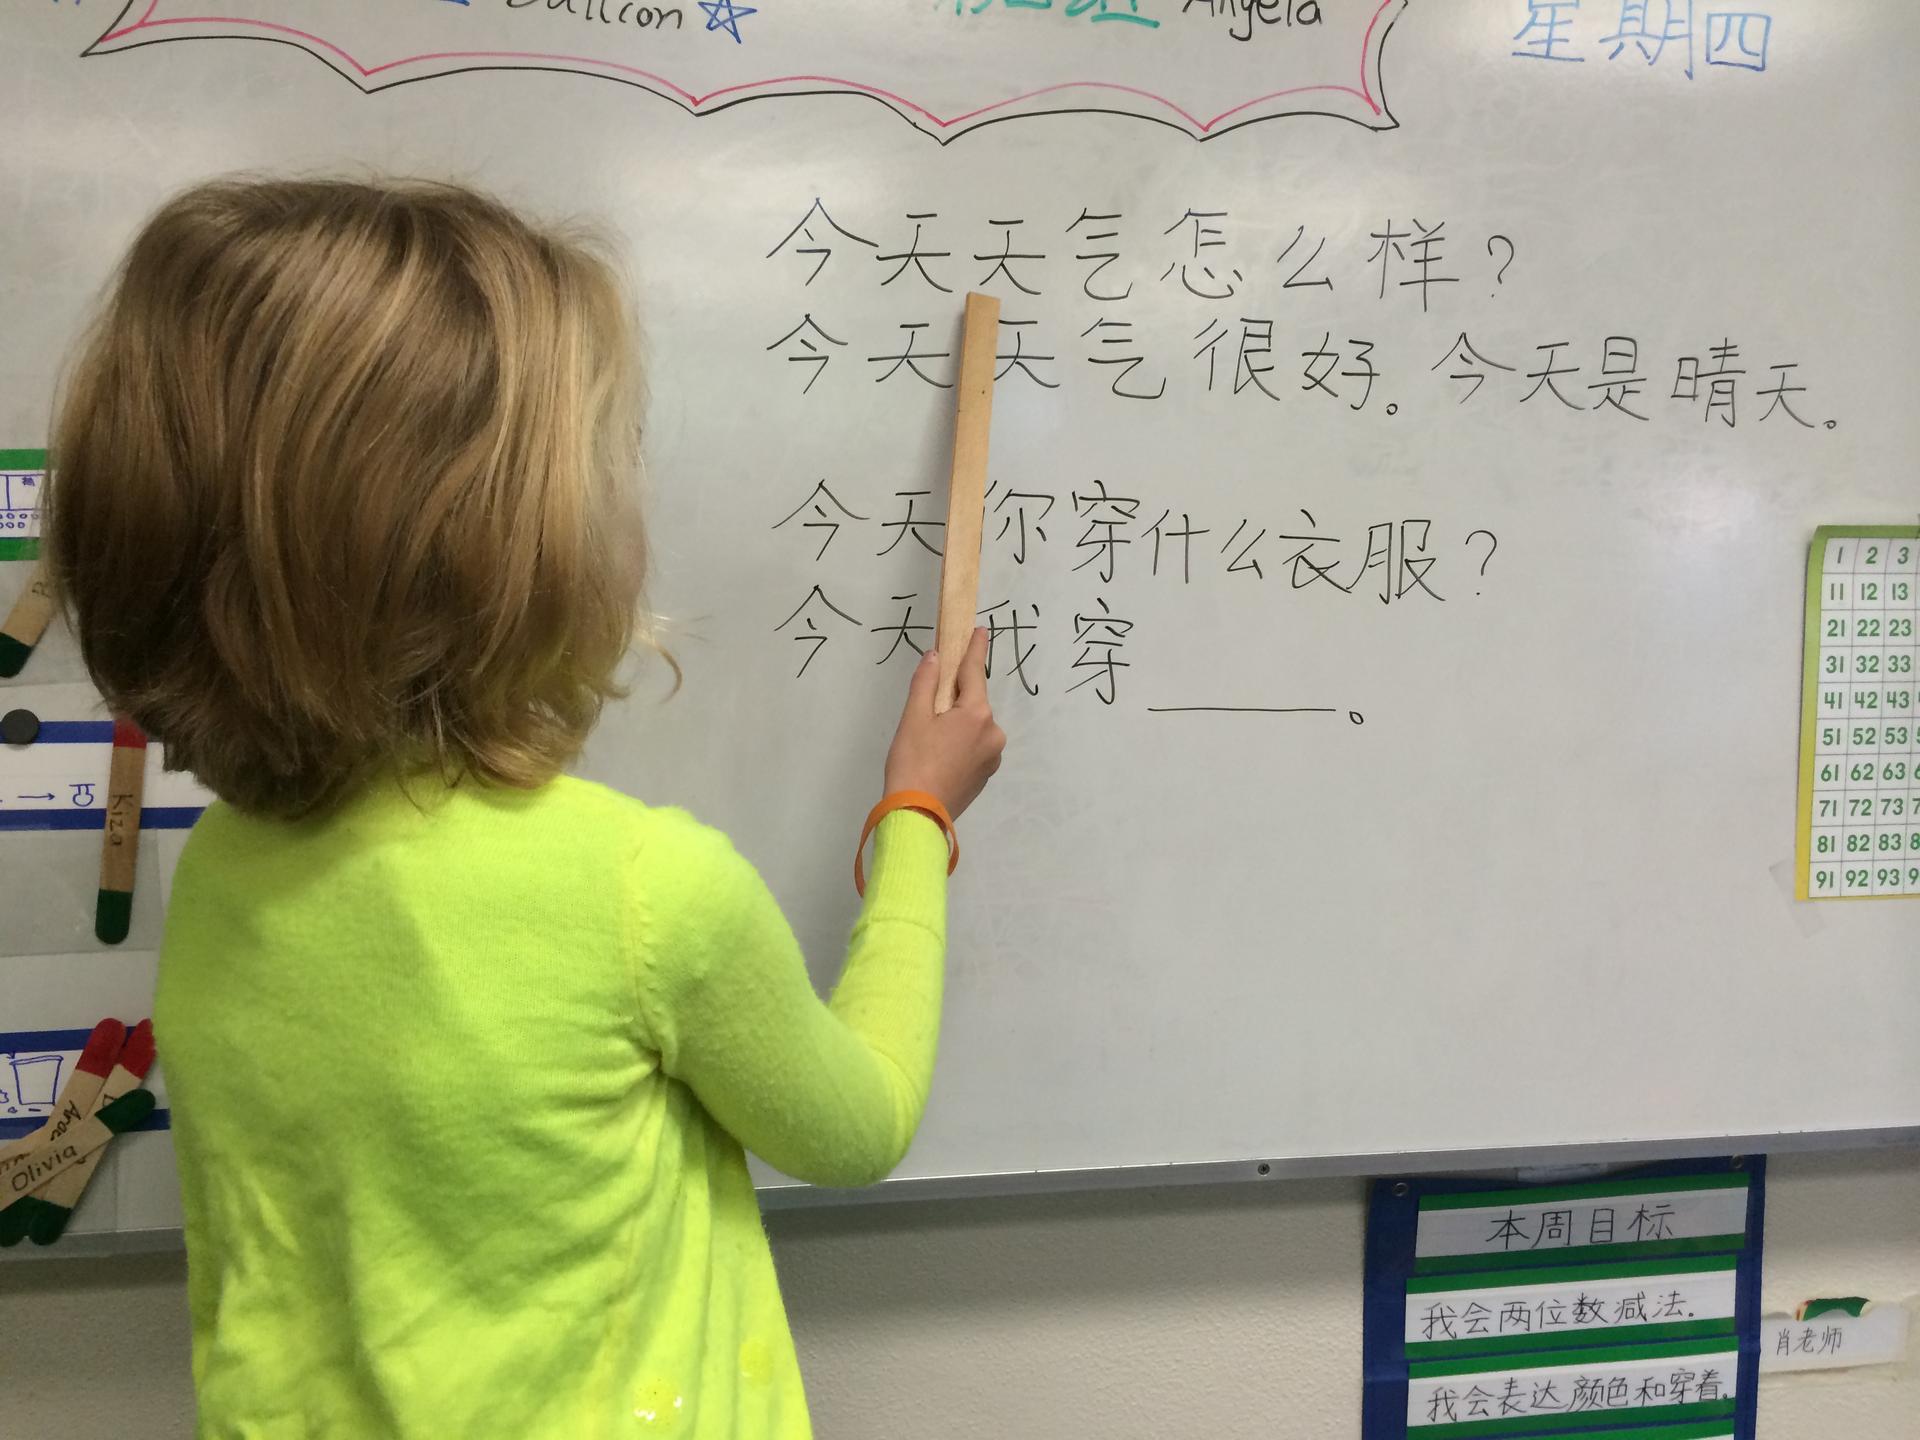 A second-grader leads her class in a Chinese exercise at Santa Clara Elementary School in southern Utah.